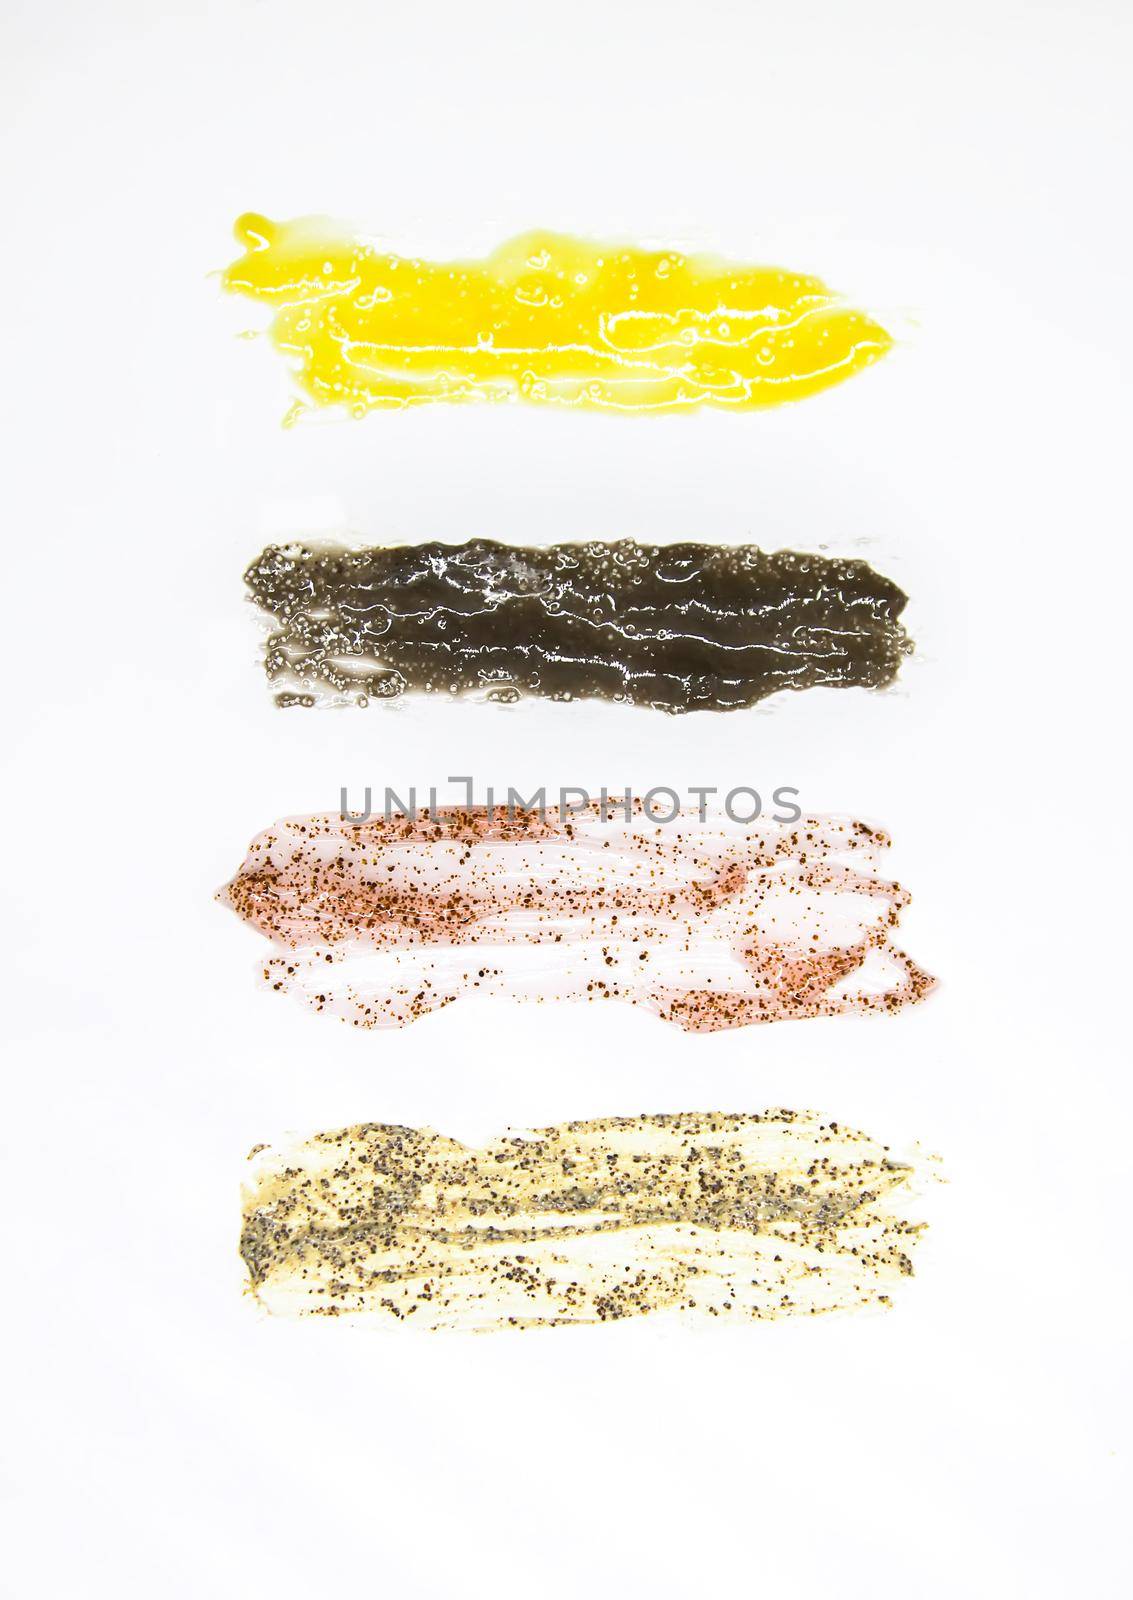 Samples of natural scrub on white background.